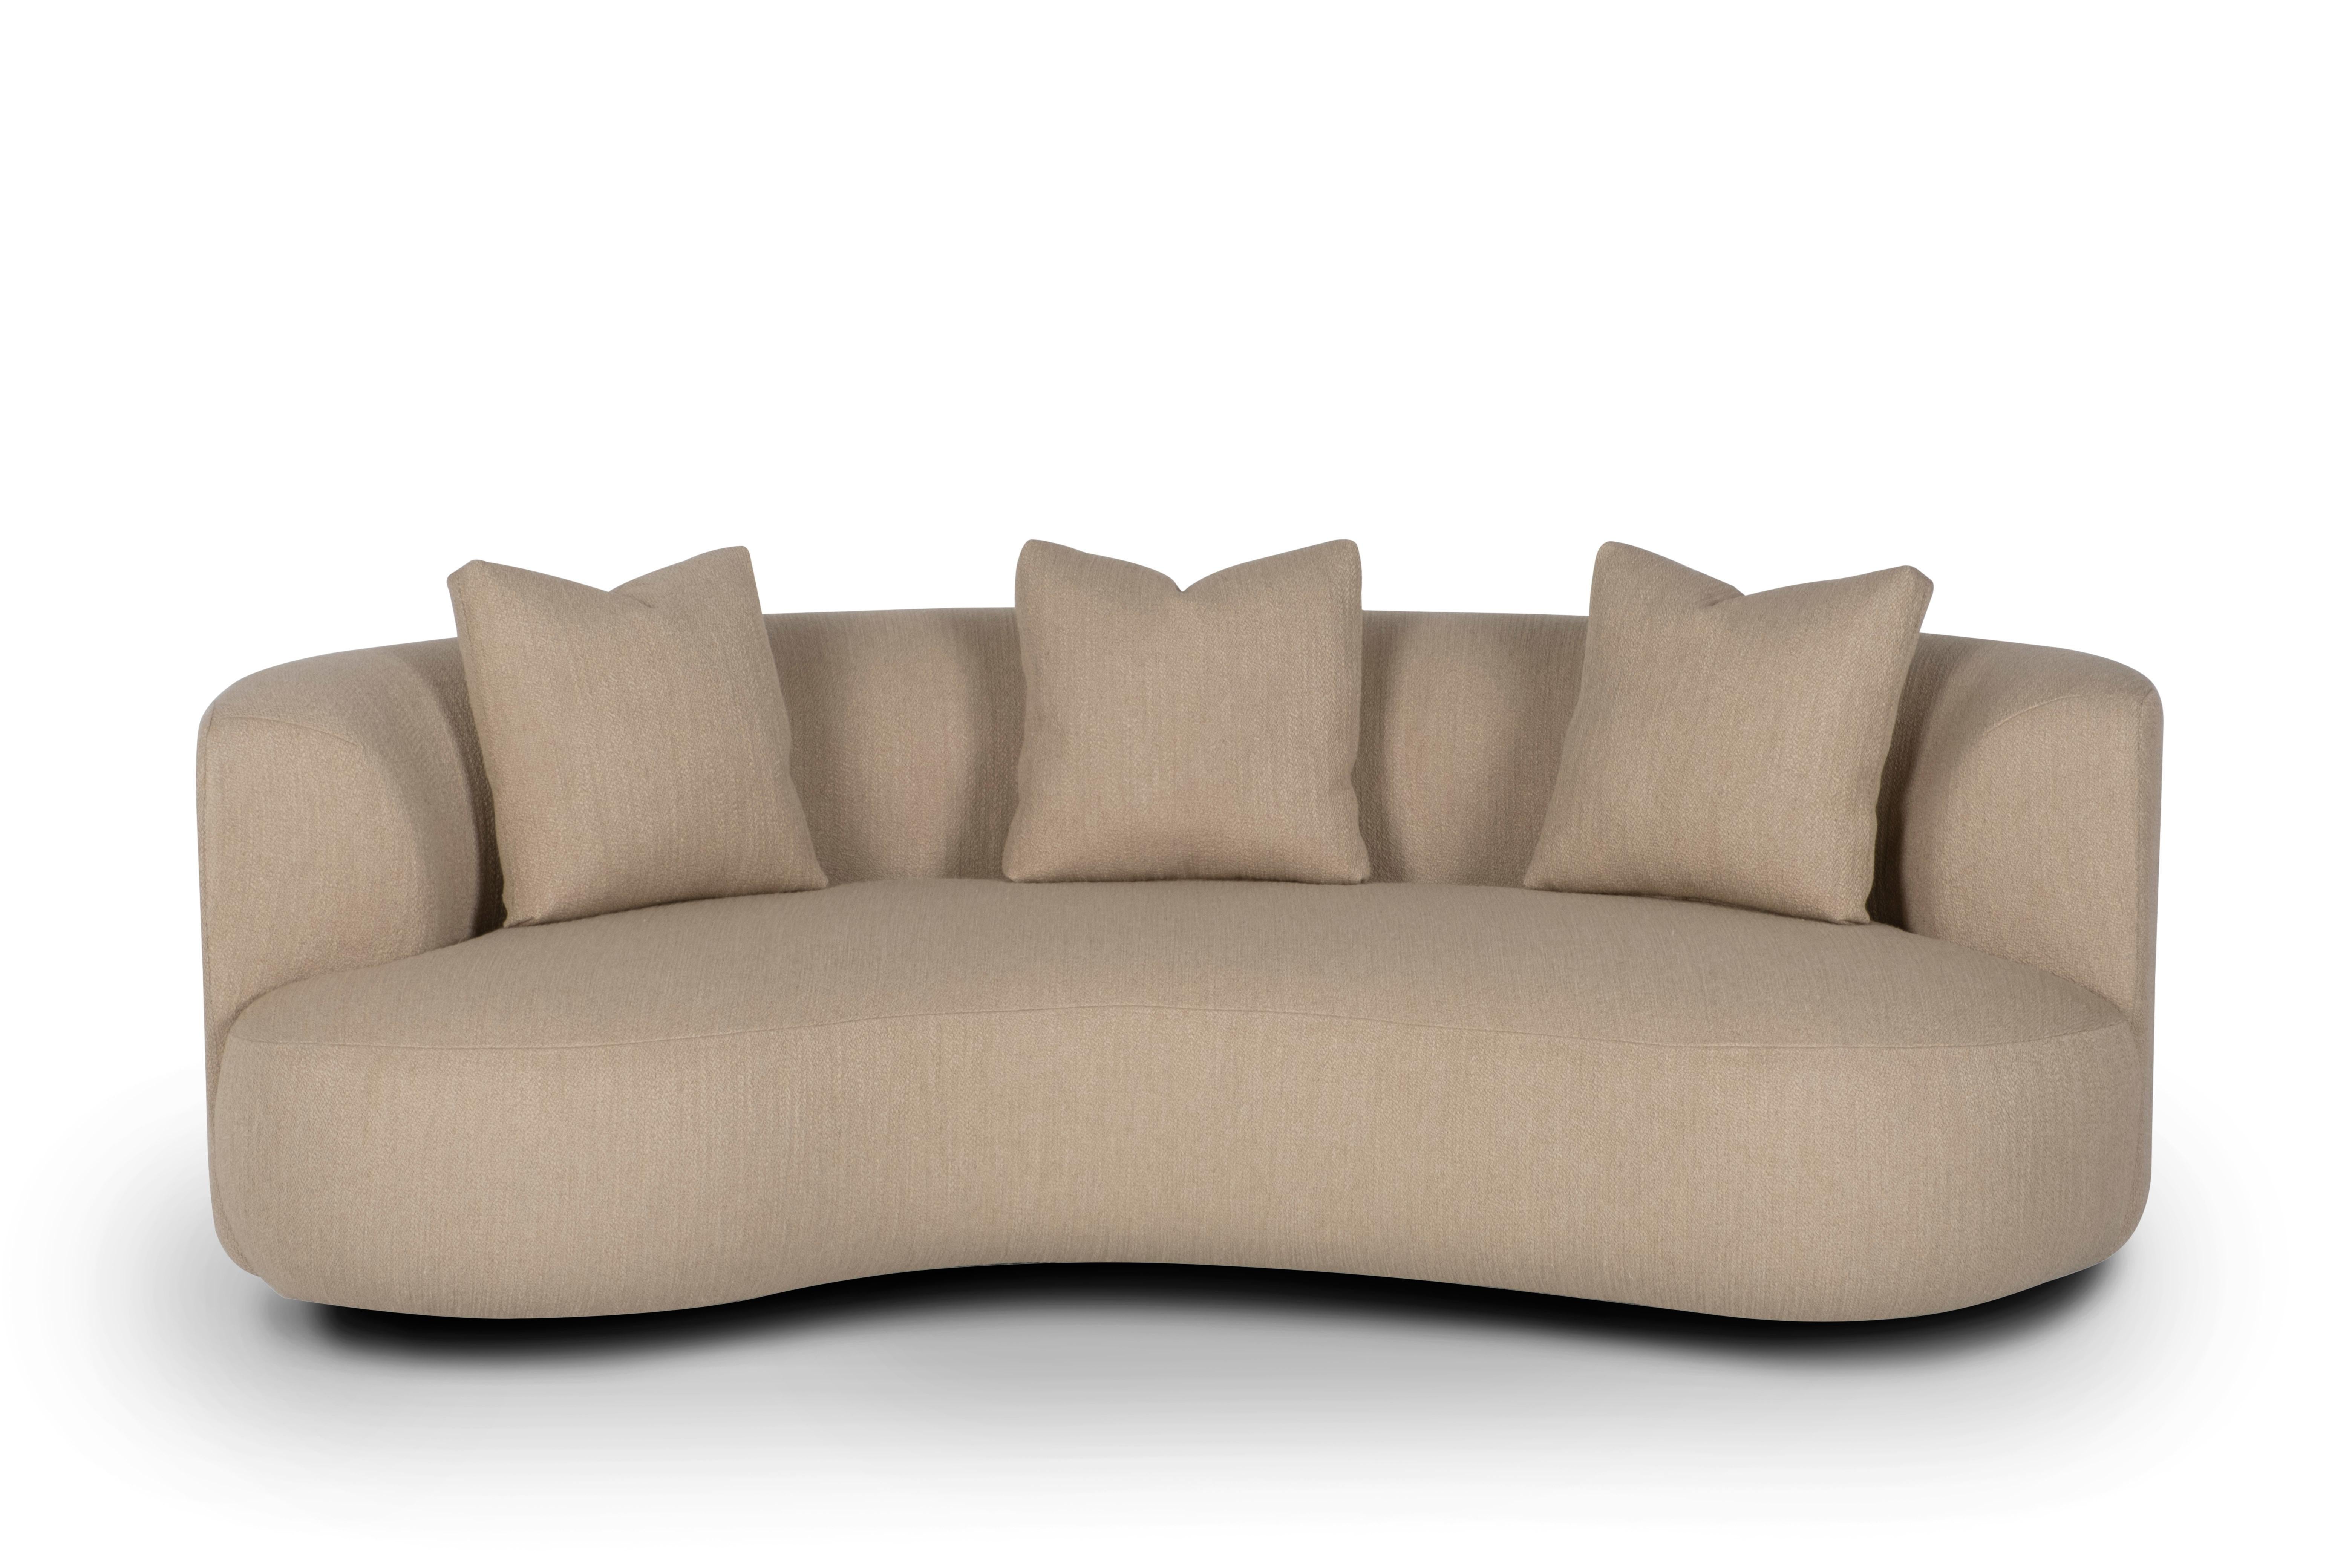 Twins sofa, contemporary collection, handcrafted in Portugal - Europe by Greenapple.

Designed by Rute Martins for the contemporary collection, the Twins curved sofa and day bed share the same genes, yet each possesses a distinct design, creating a